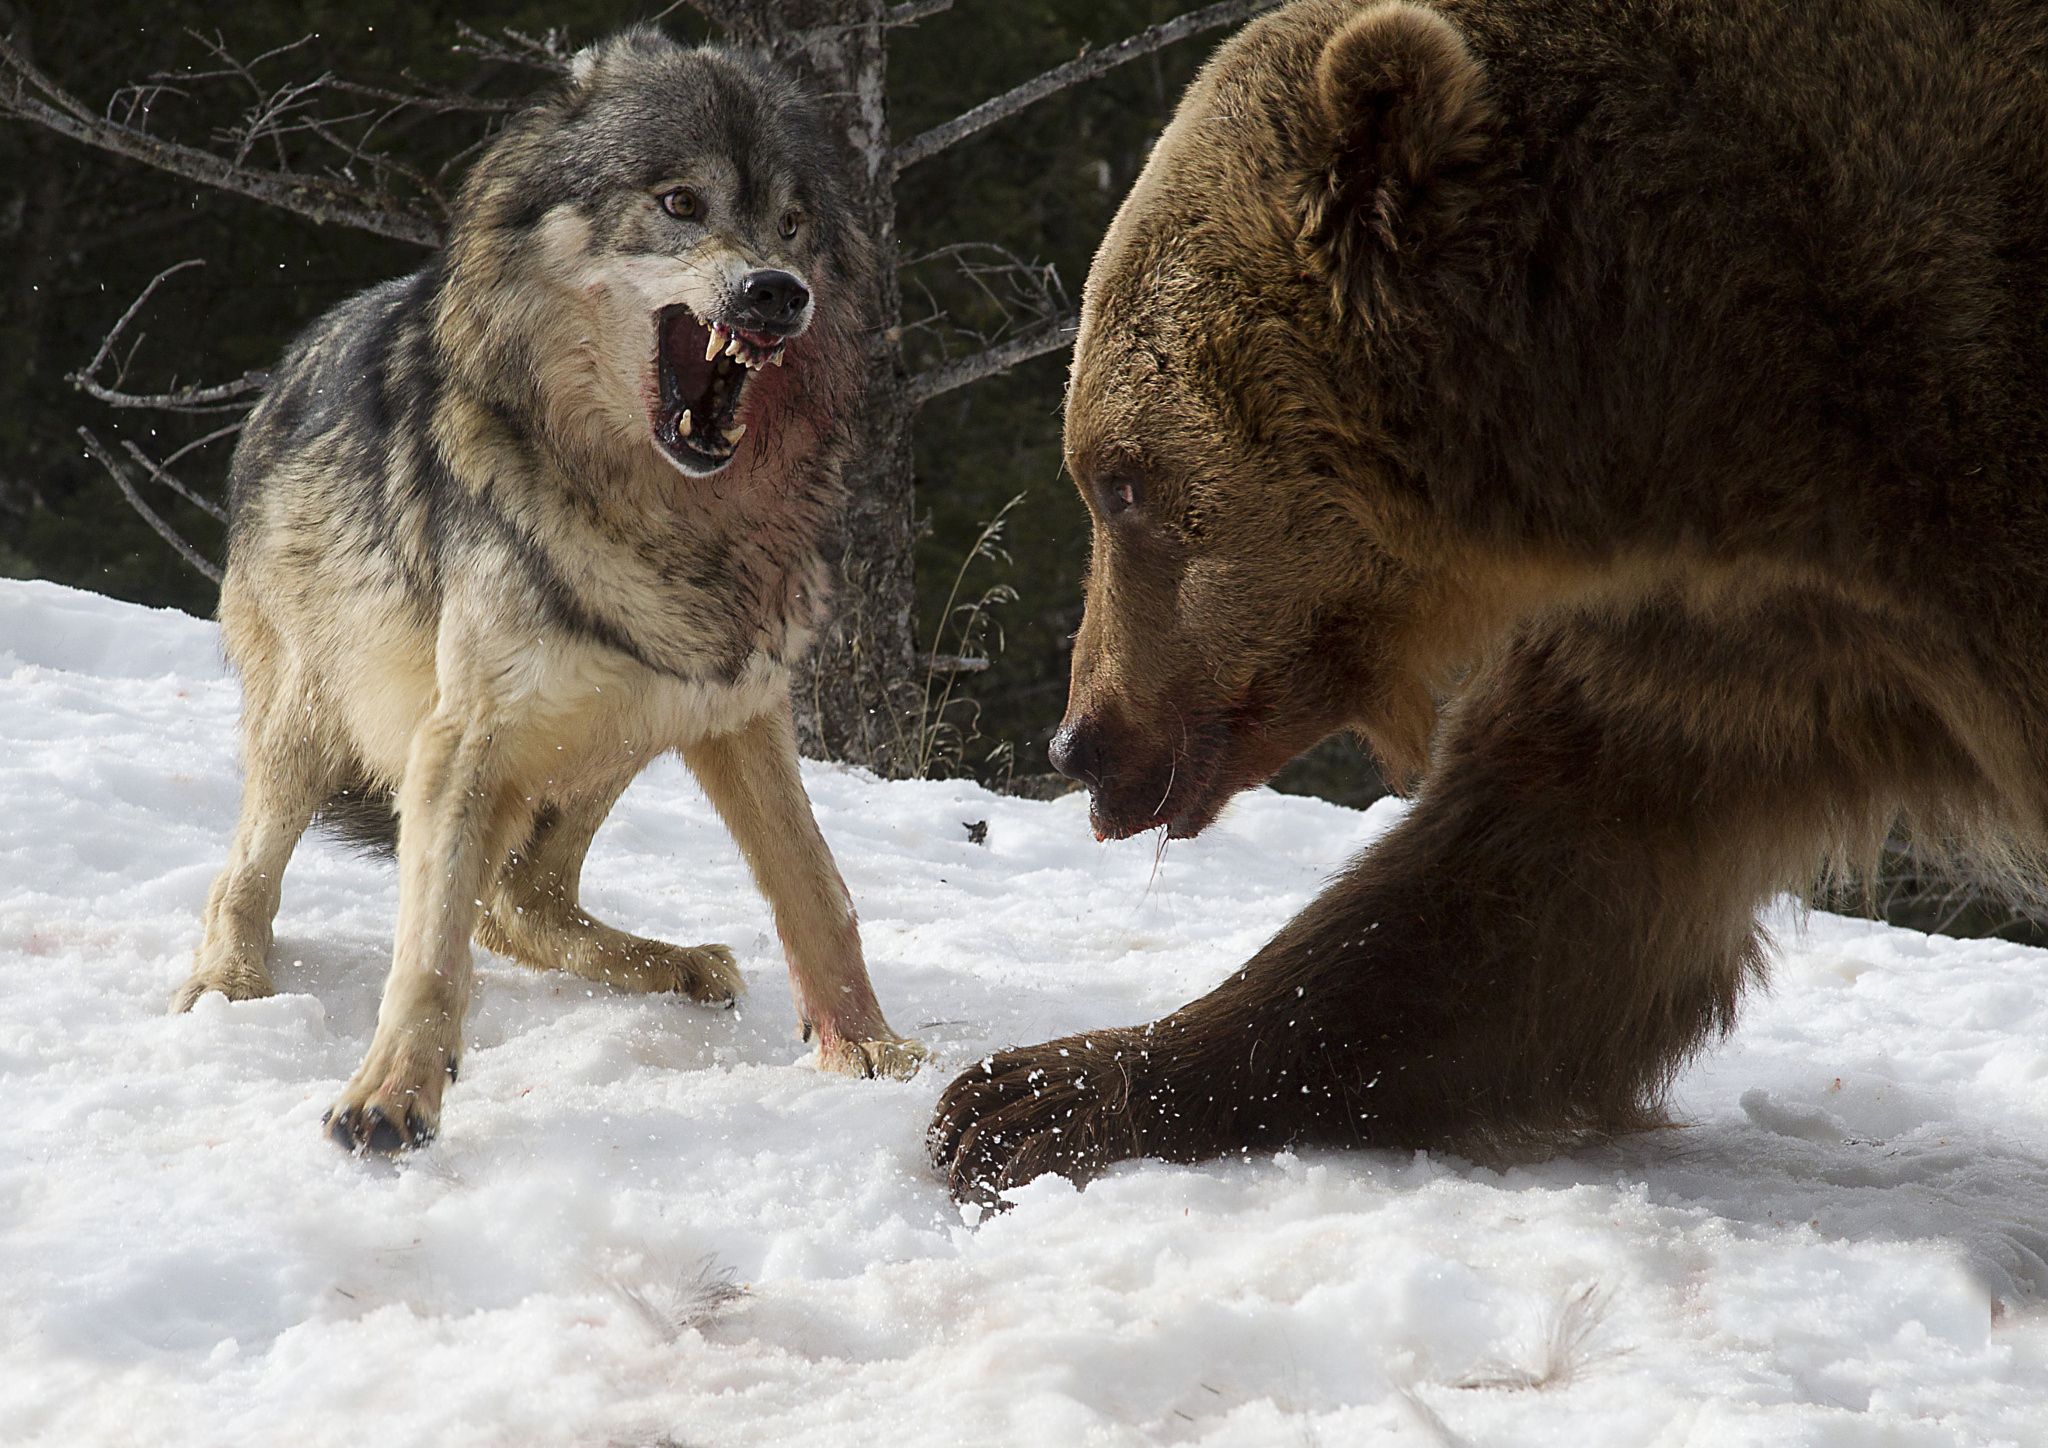 Grizzly and brave Wolf - The wolves were feeding on a deer carcass ...